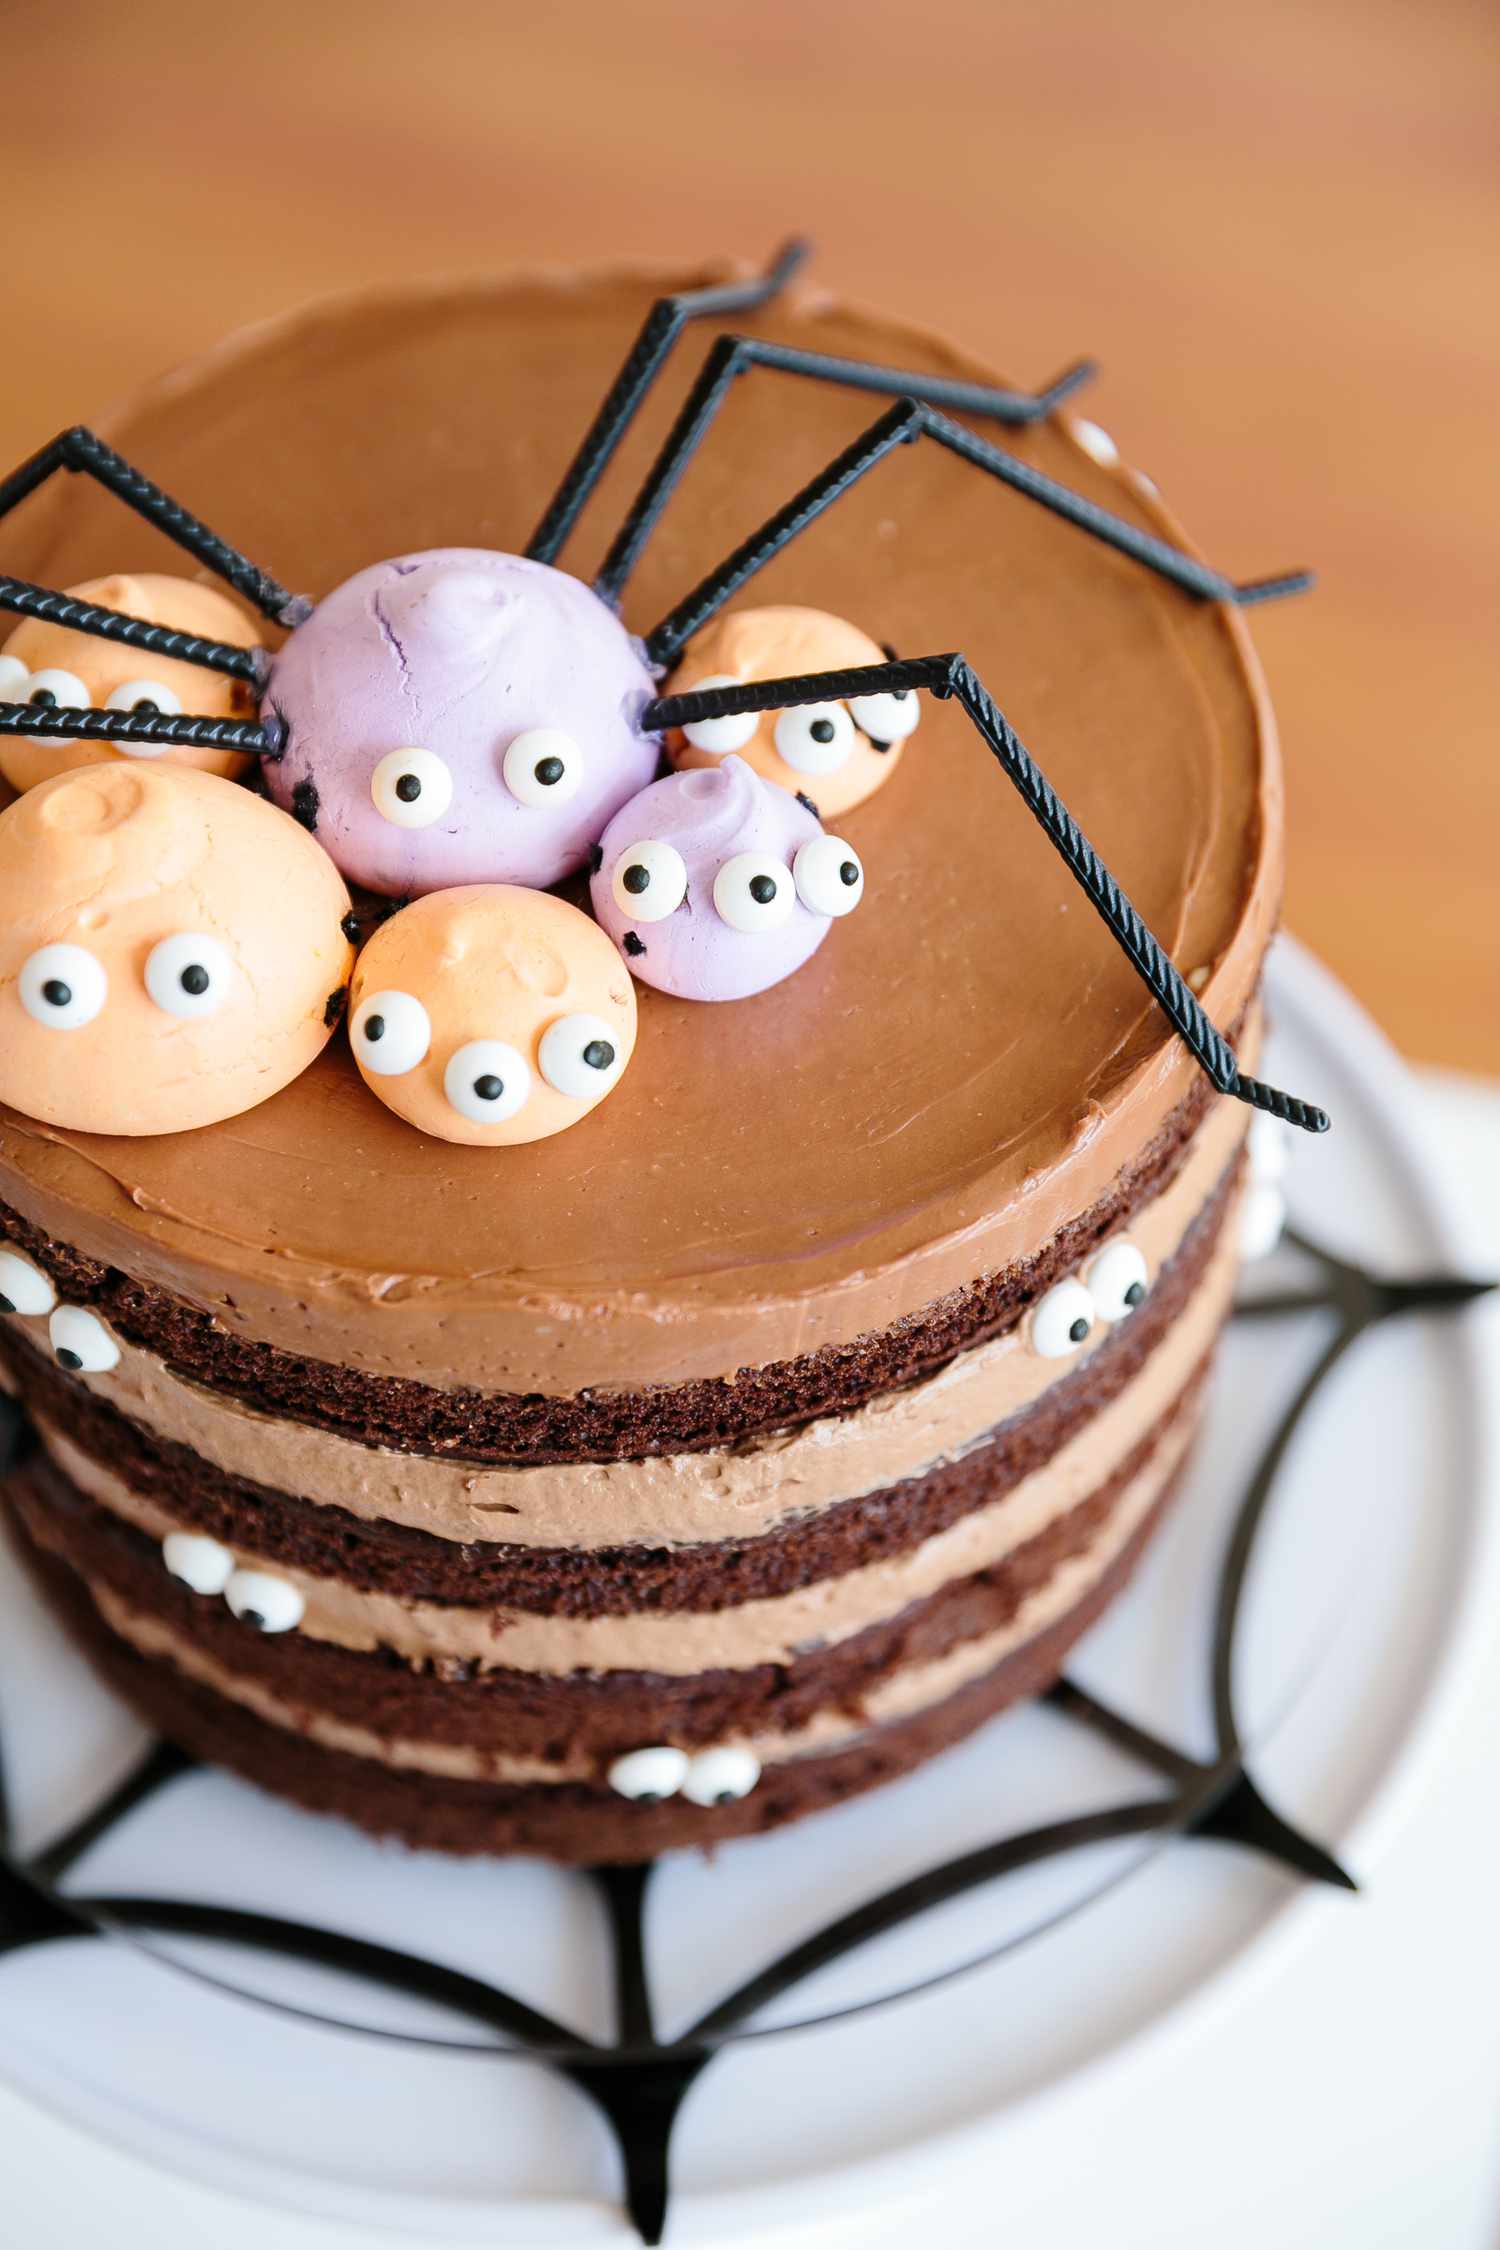 Halloween cake with chocolate frosting and edible spider decorations